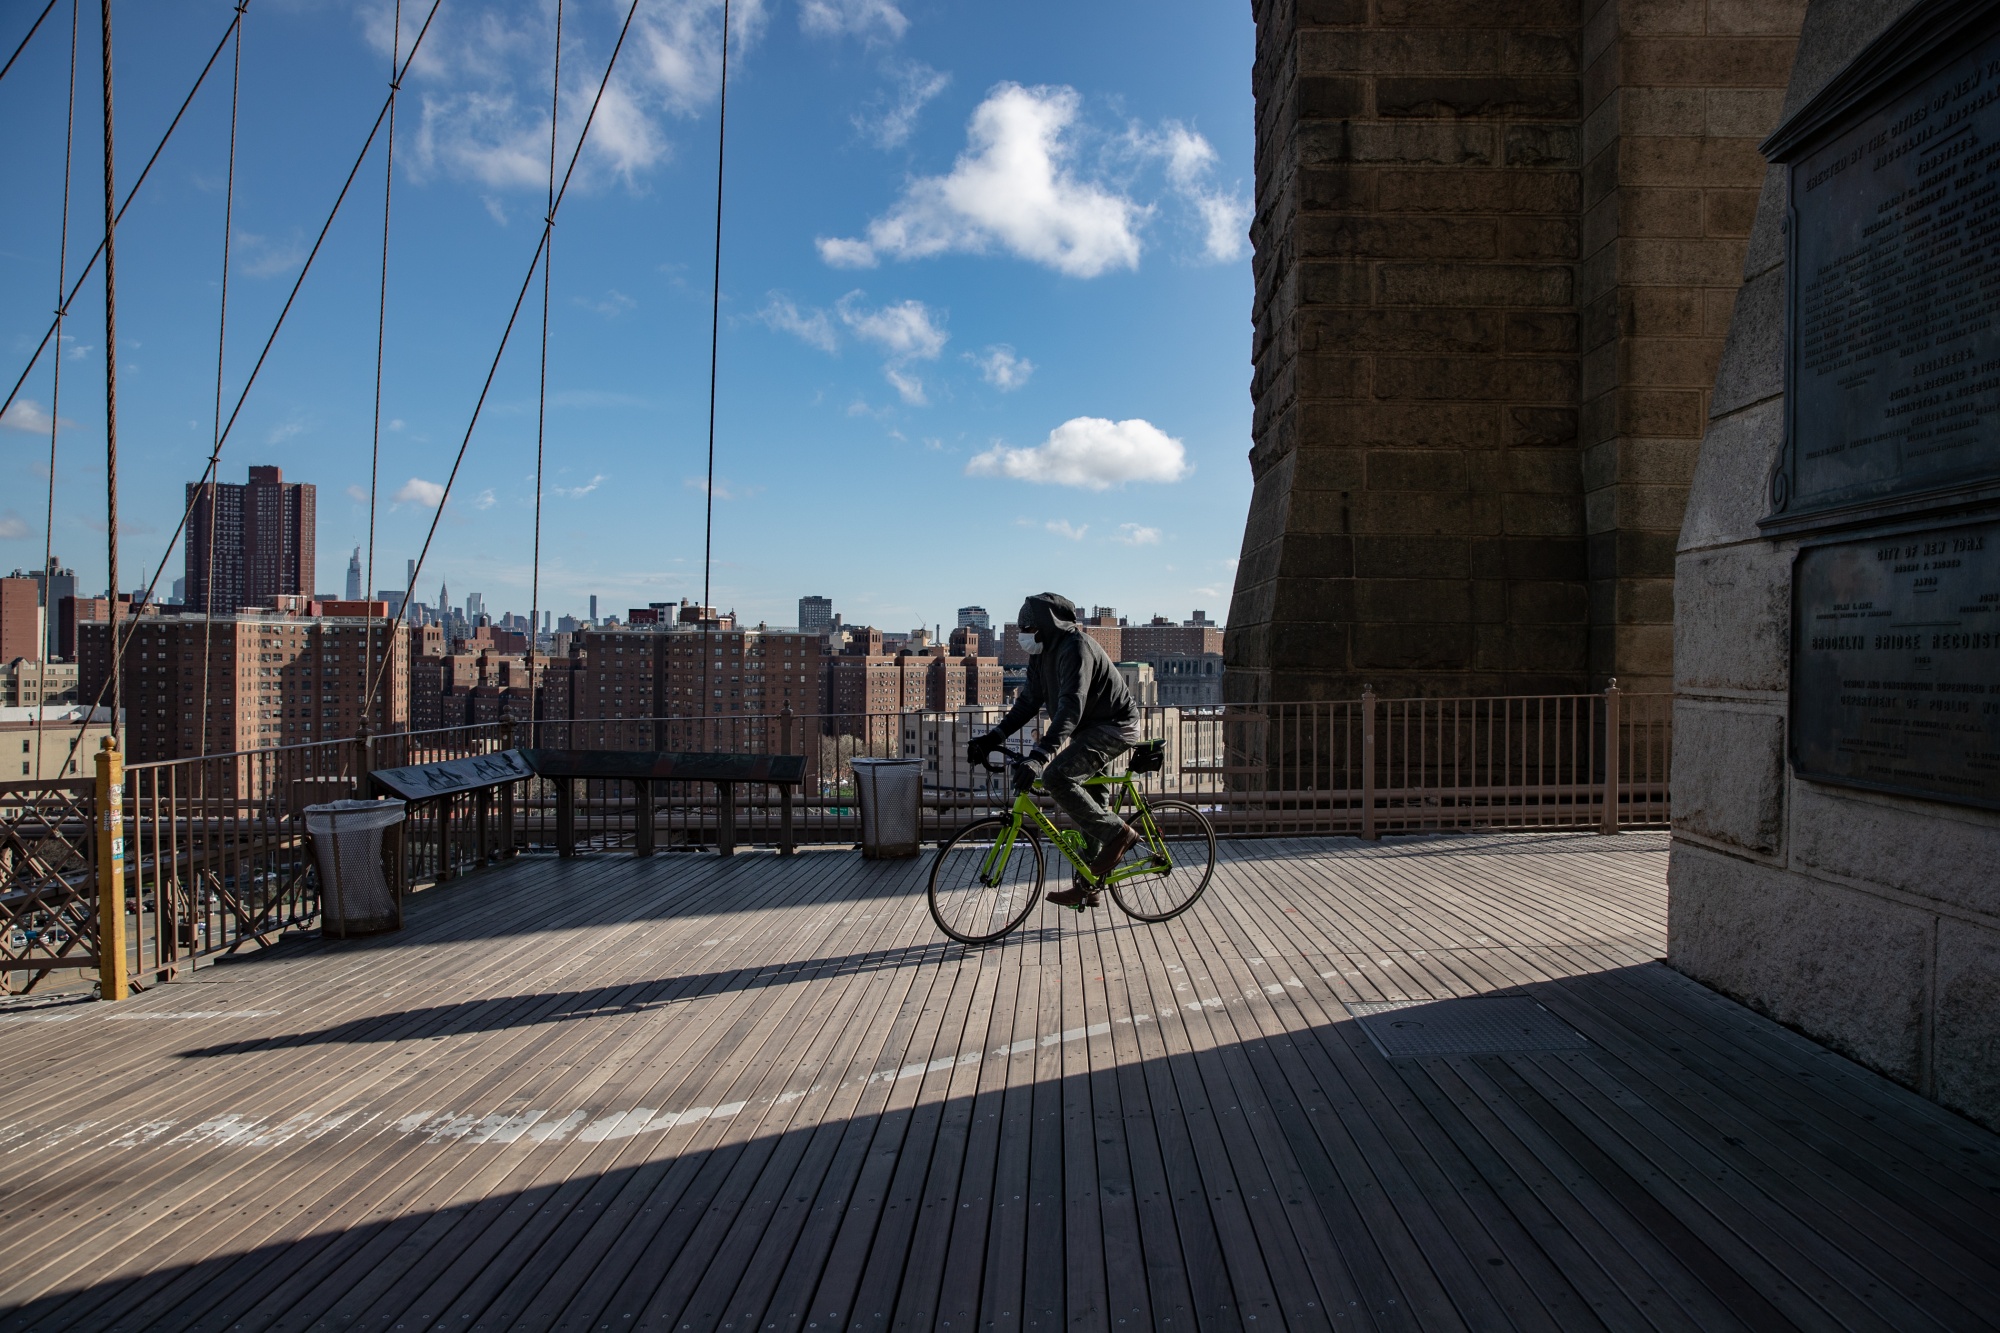 A person rides a bicycle across the Brooklyn Bridge in New York on April 1.